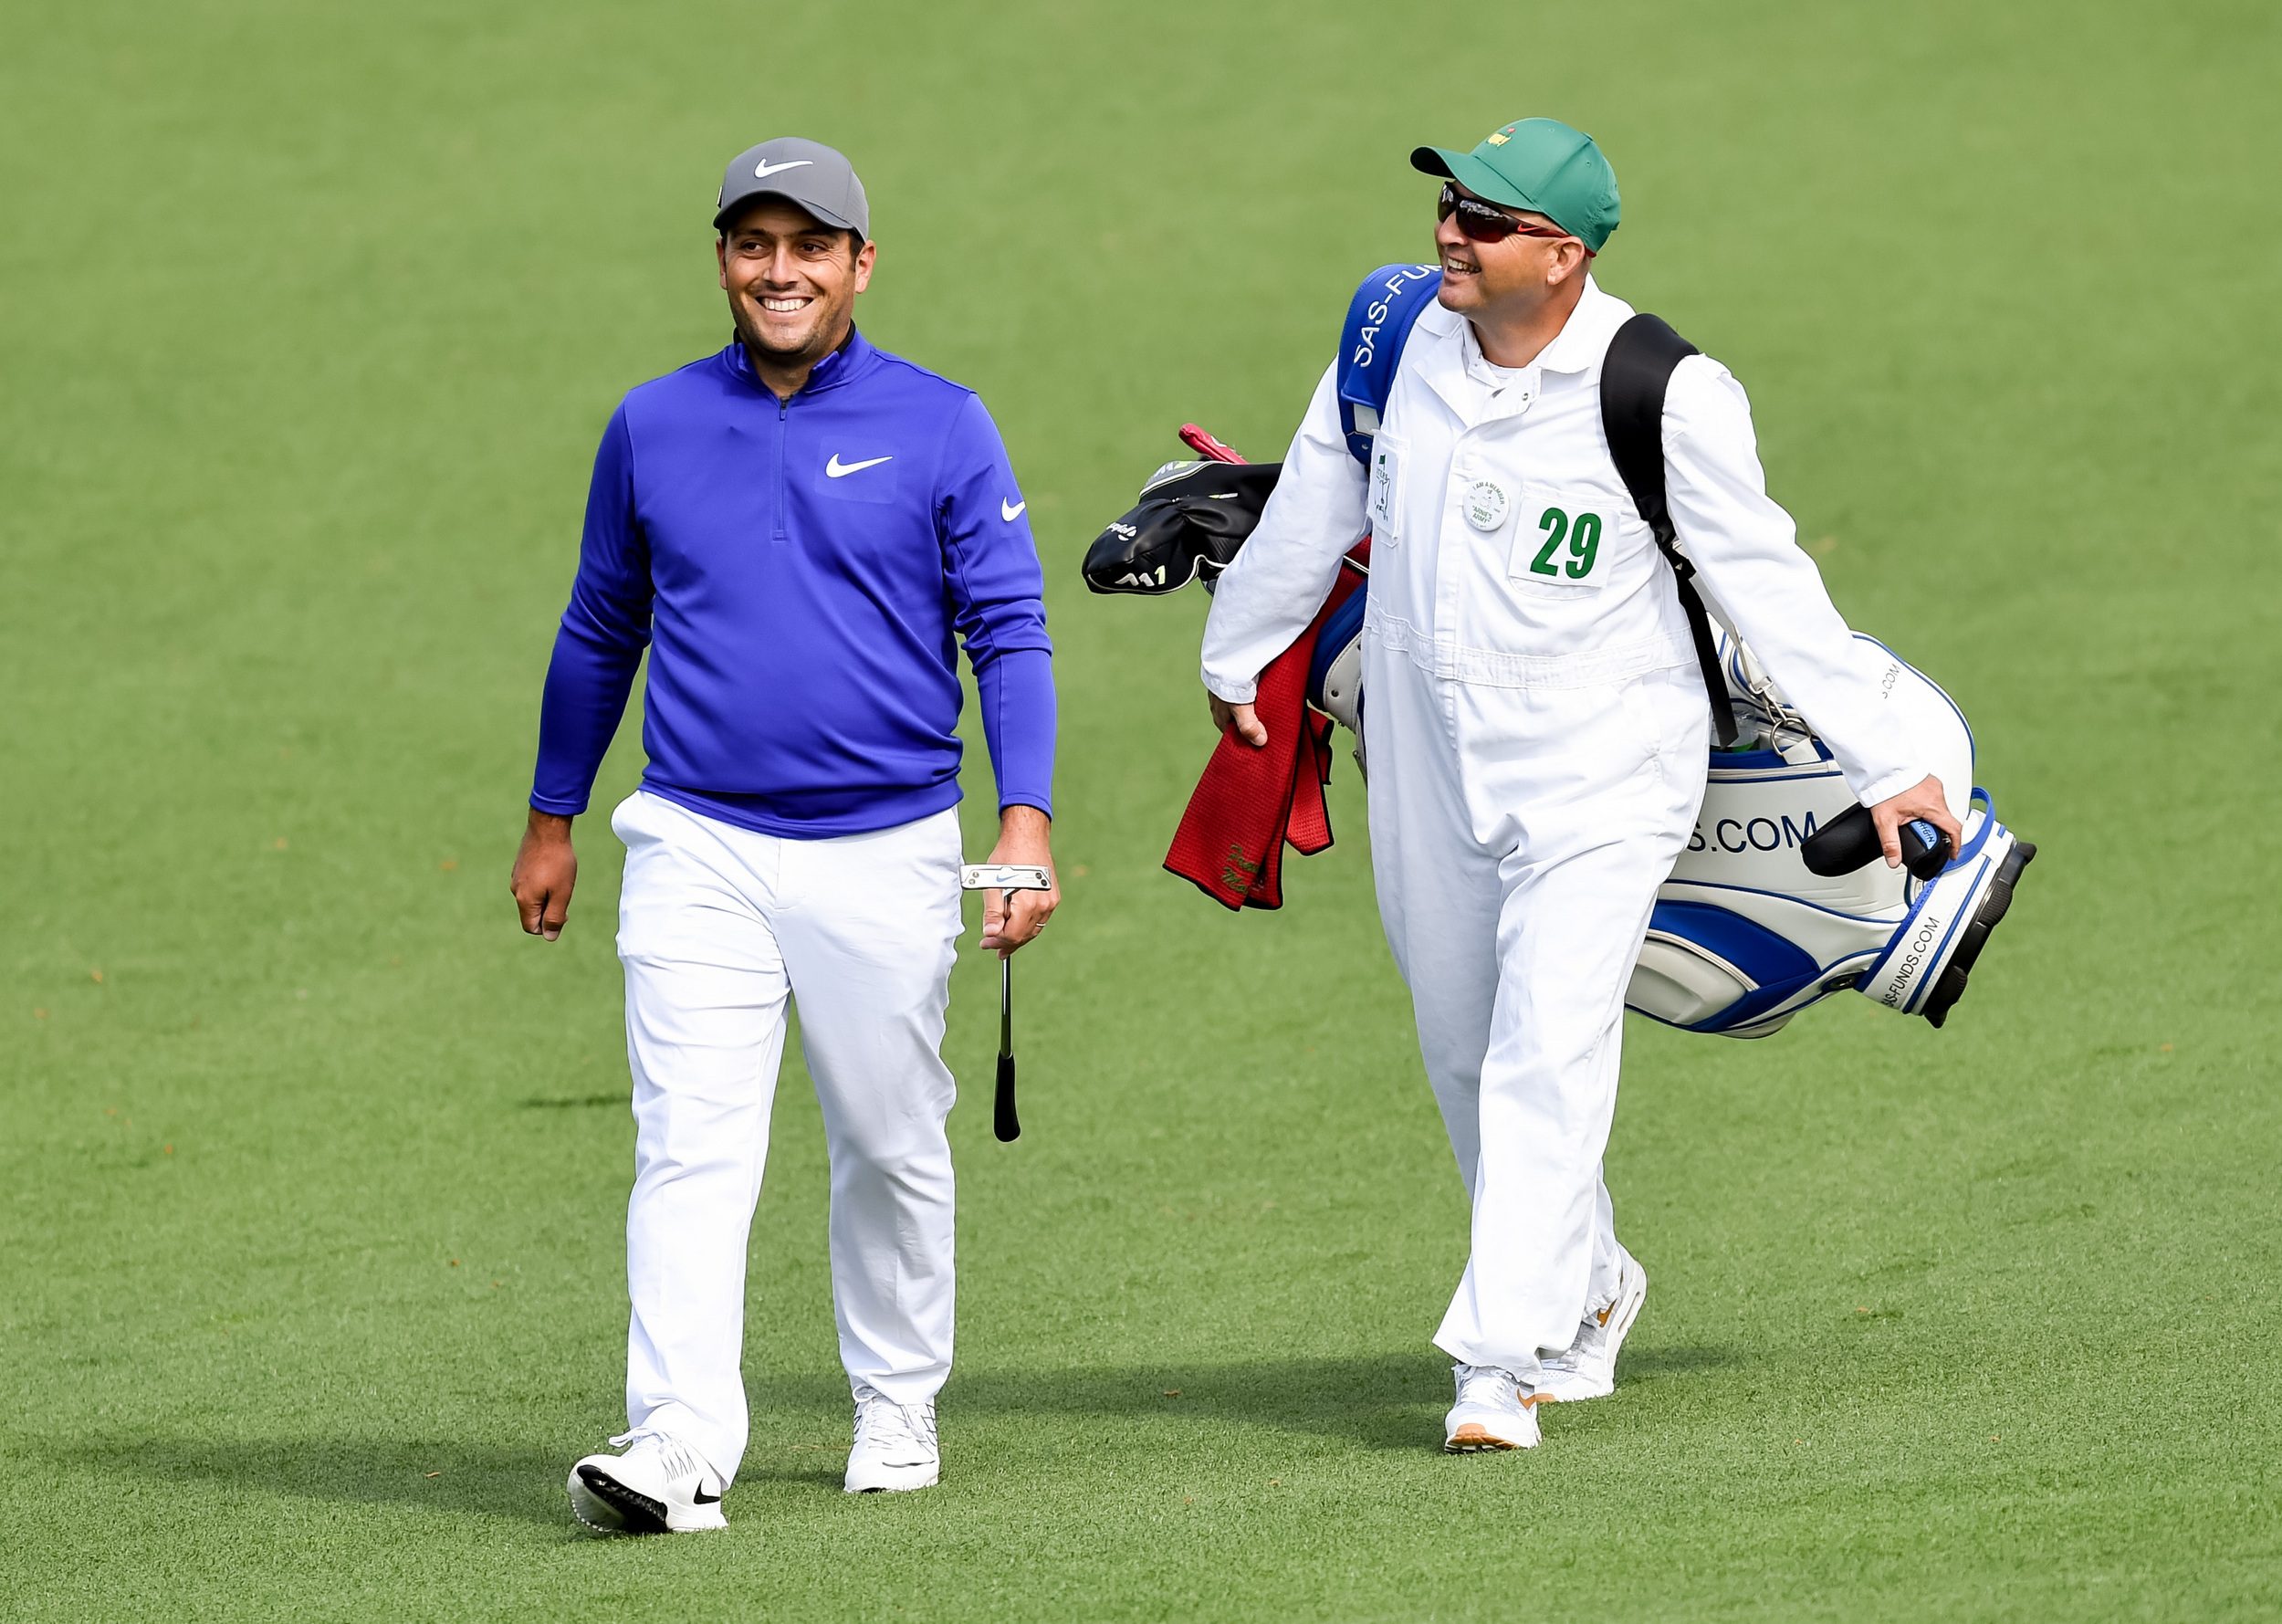 Francesco Molinari has been steadily improving each time he comes to the Masters and he could finish strong this year. (Image: Augusta Chronicle)